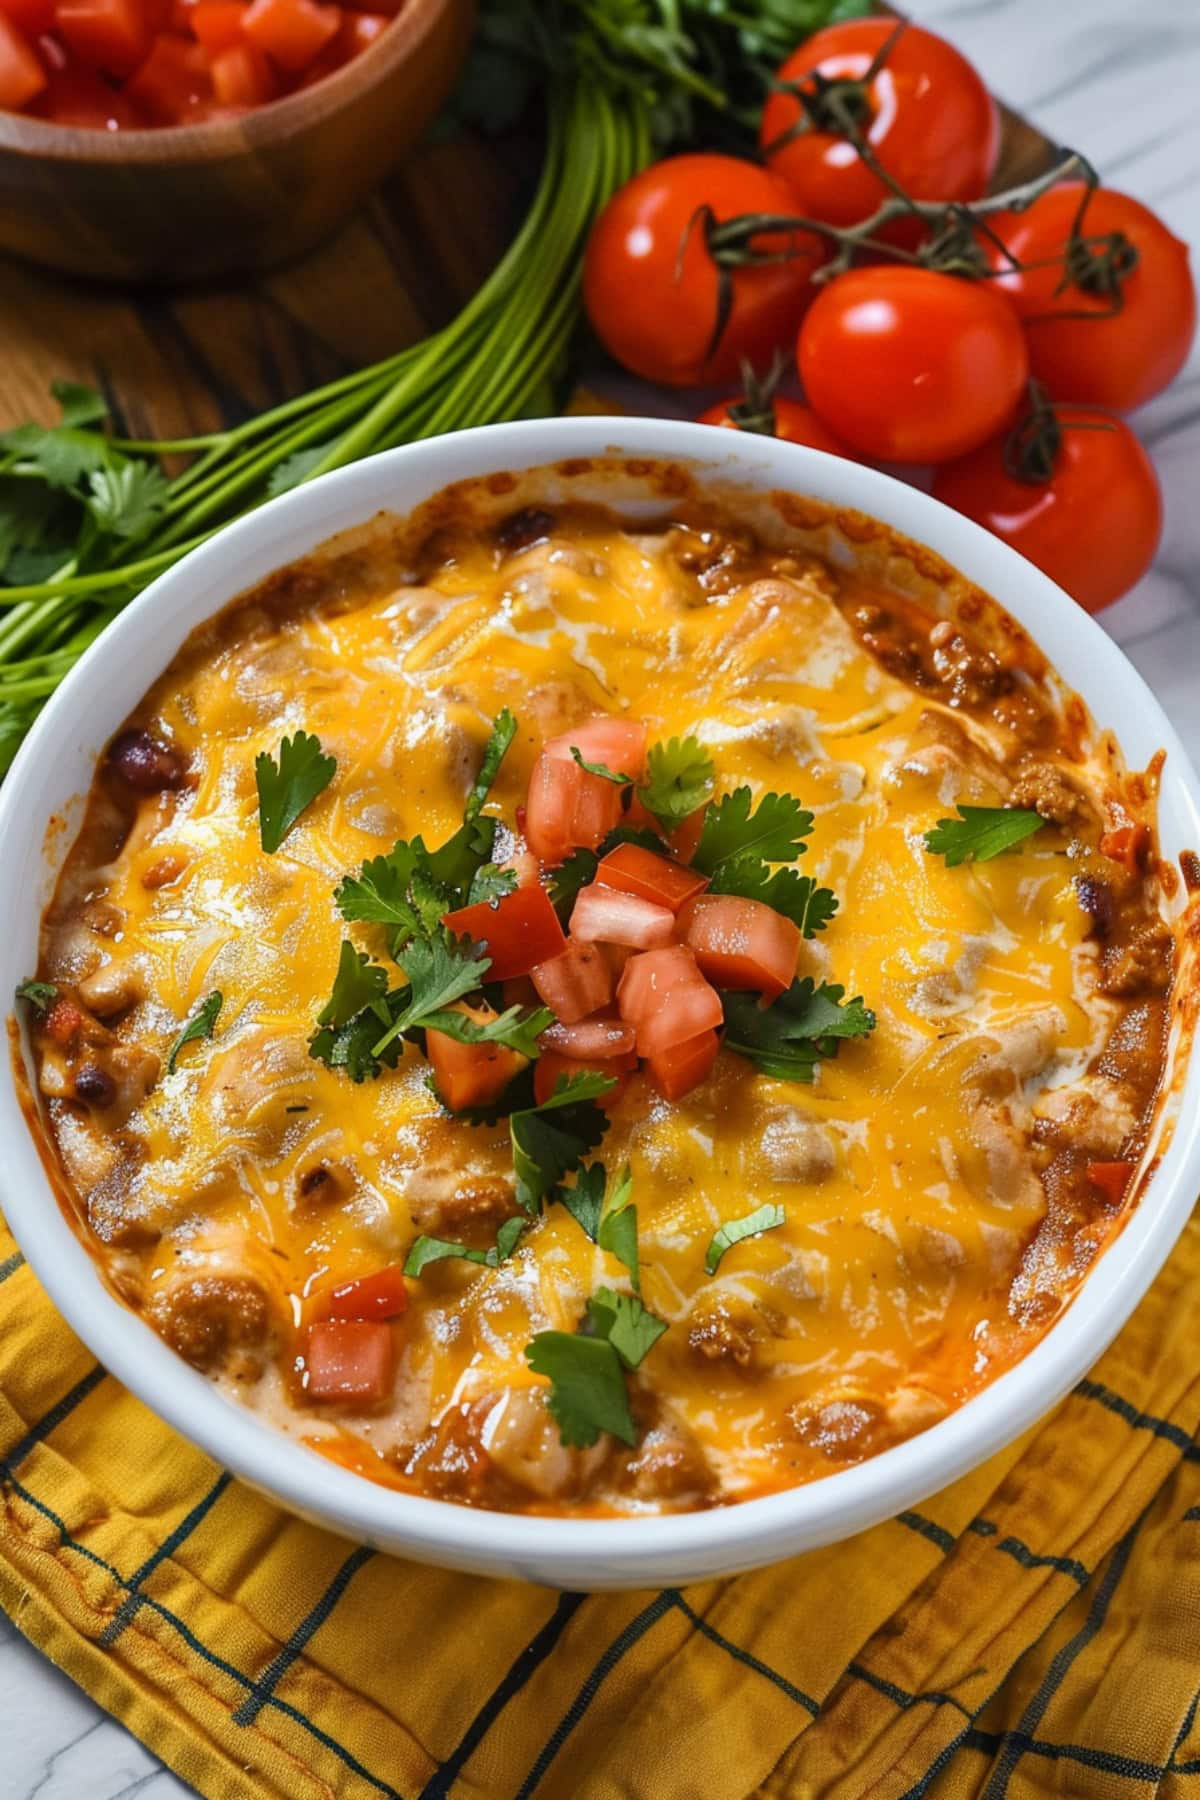 Bowl of cheesy dip with chili garnished with chopped tomatoes served on a white bowl.